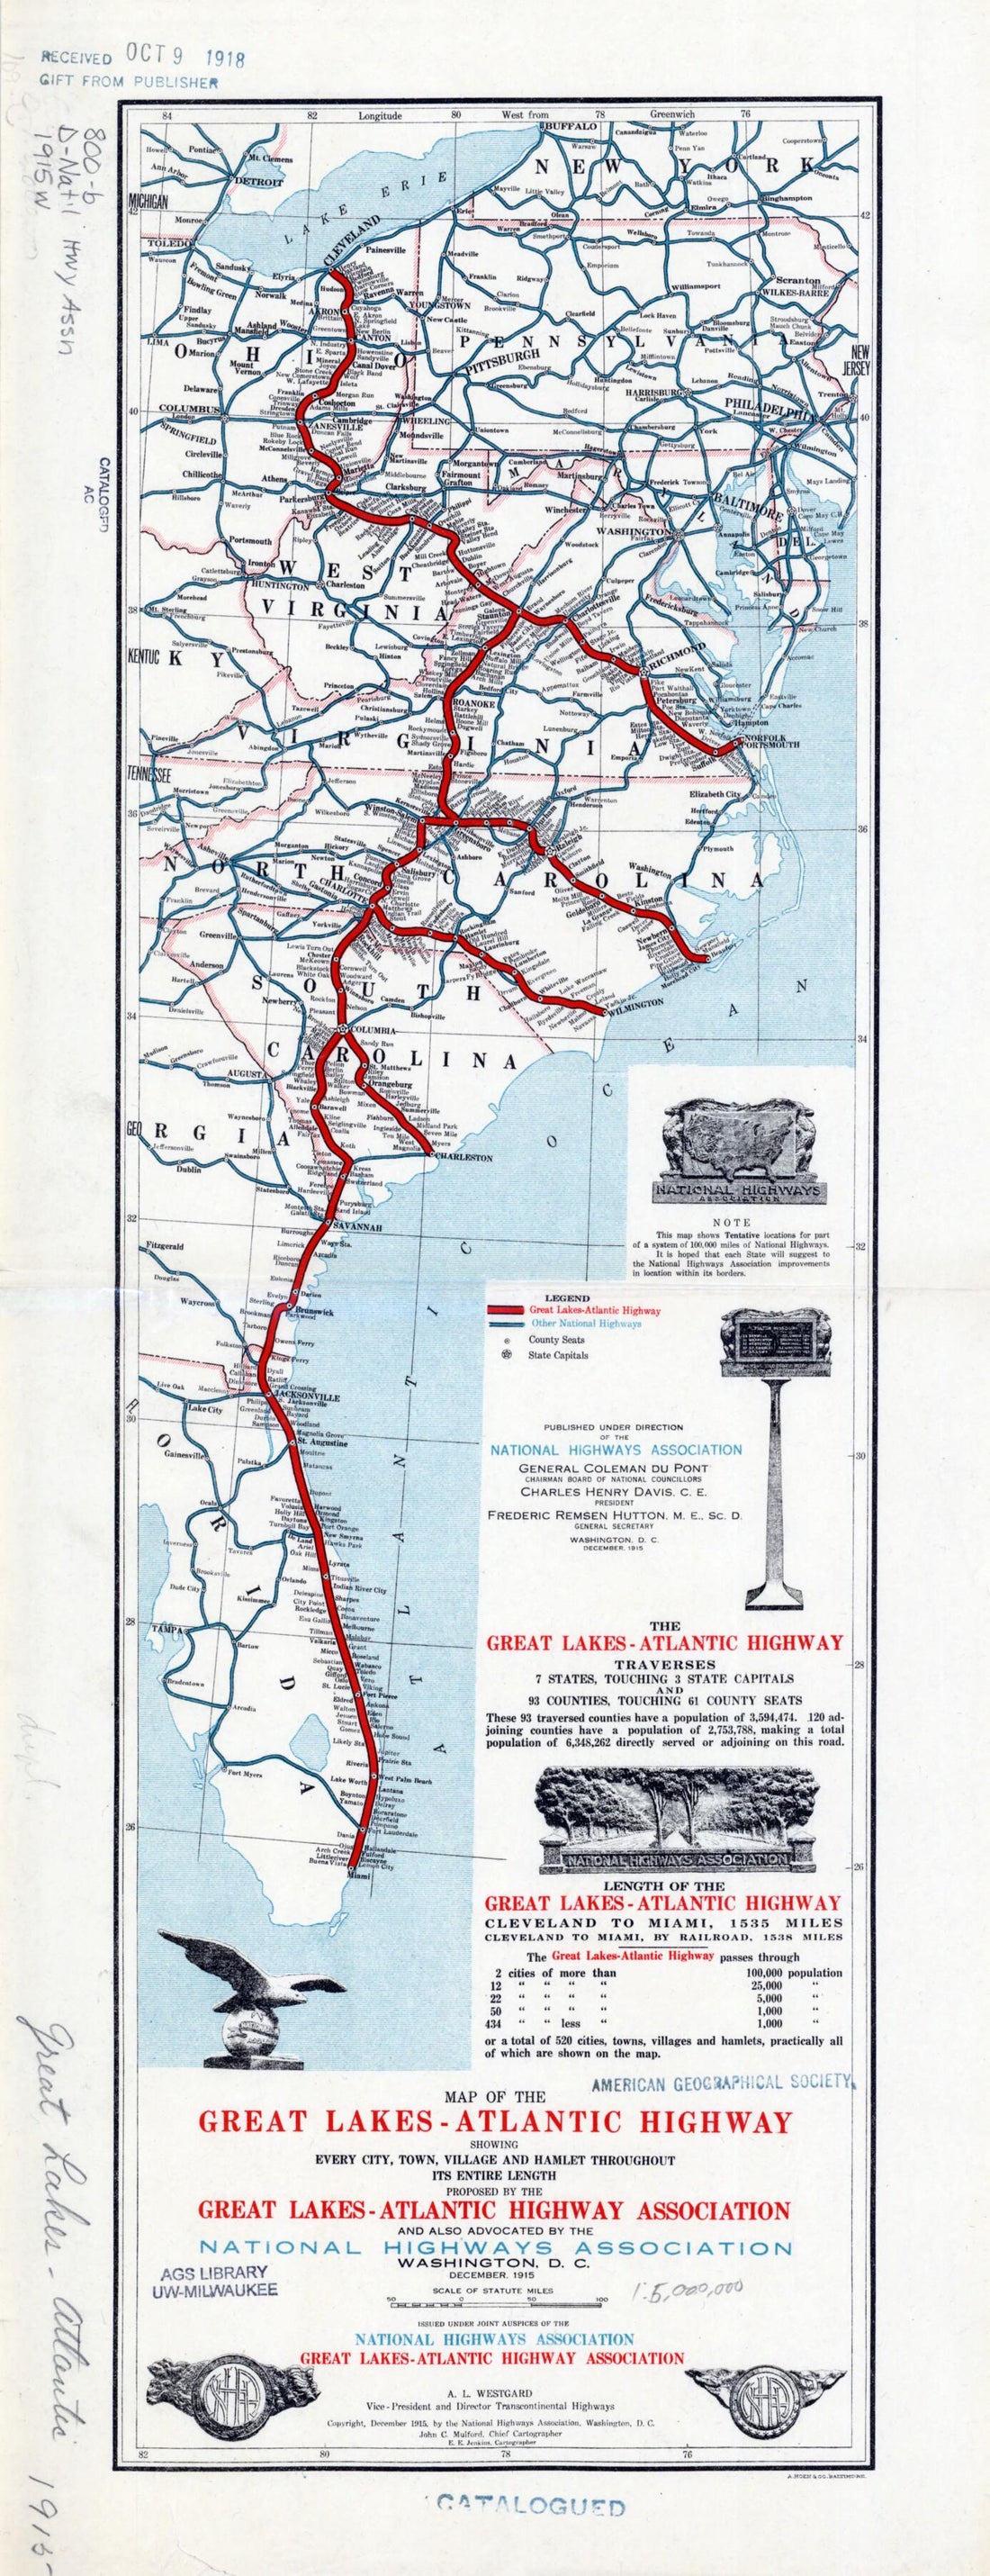 This old map of Atlantic Highway. (Atlantic Highway: Showing Every City, Town, Village and Hamlet Throughout Its Entire Length) from 1915 was created by  A. Hoen and Company,  Great Lakes Atlantic Highway Association, E. E. Jenkins, John C. Mulford,  Nat